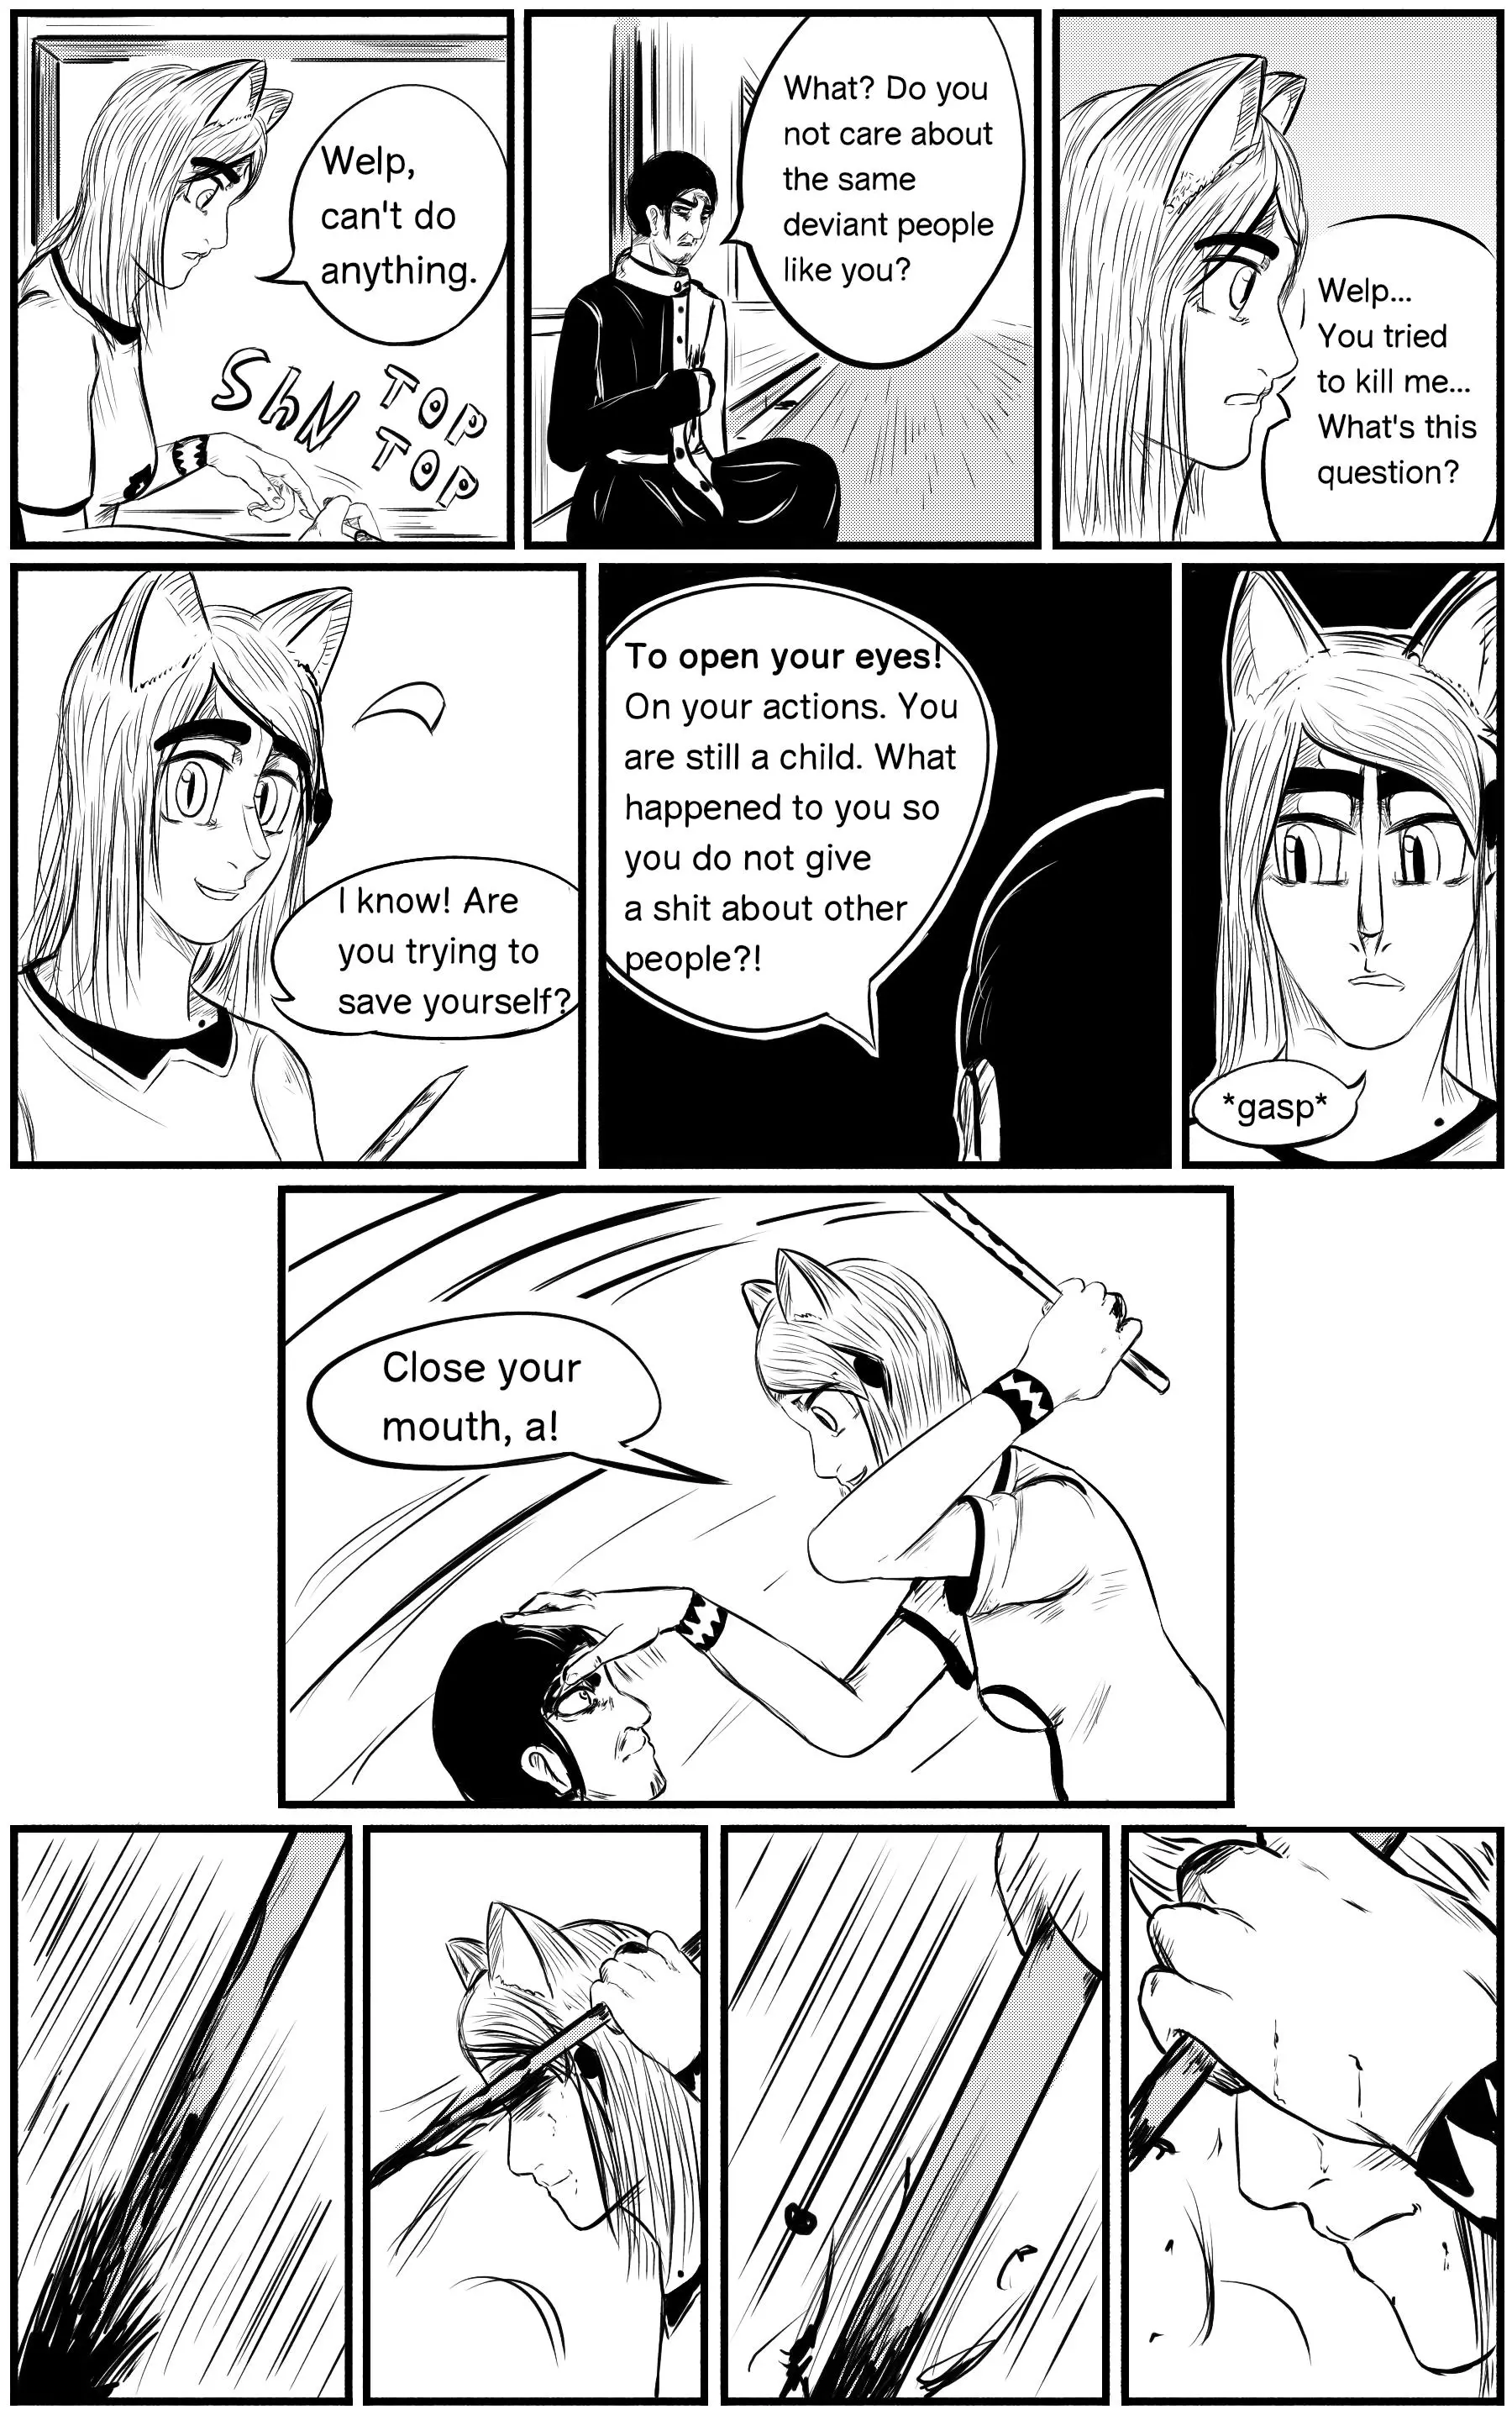 A Party Cure - 7 page 12-27a8afdb